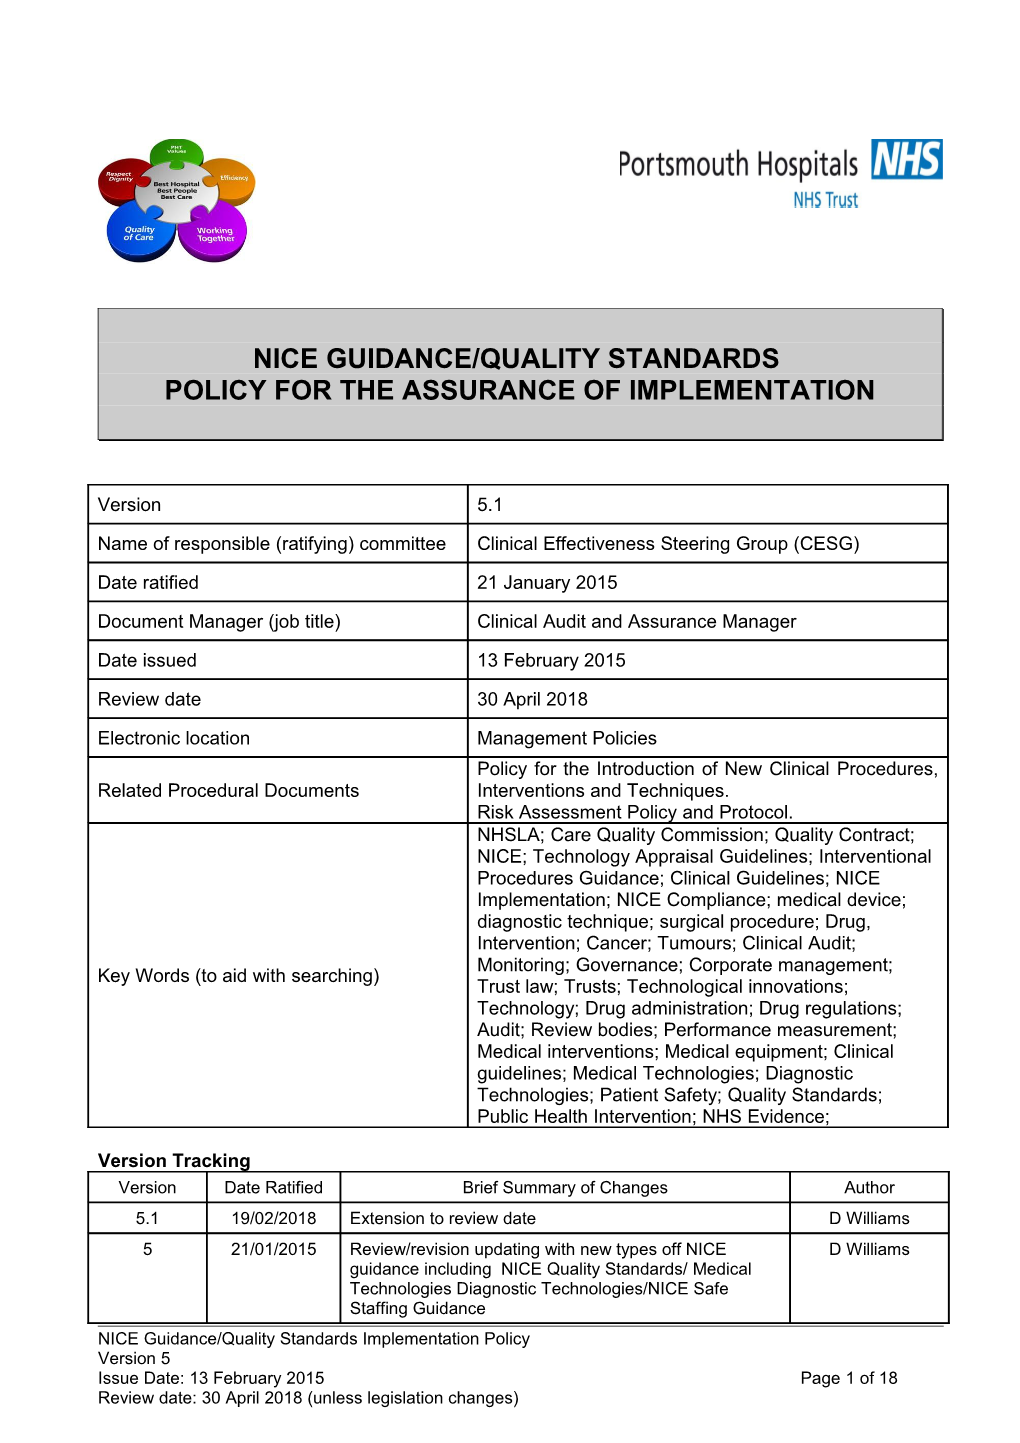 NICE Guidance Assurance of Implementation Policy